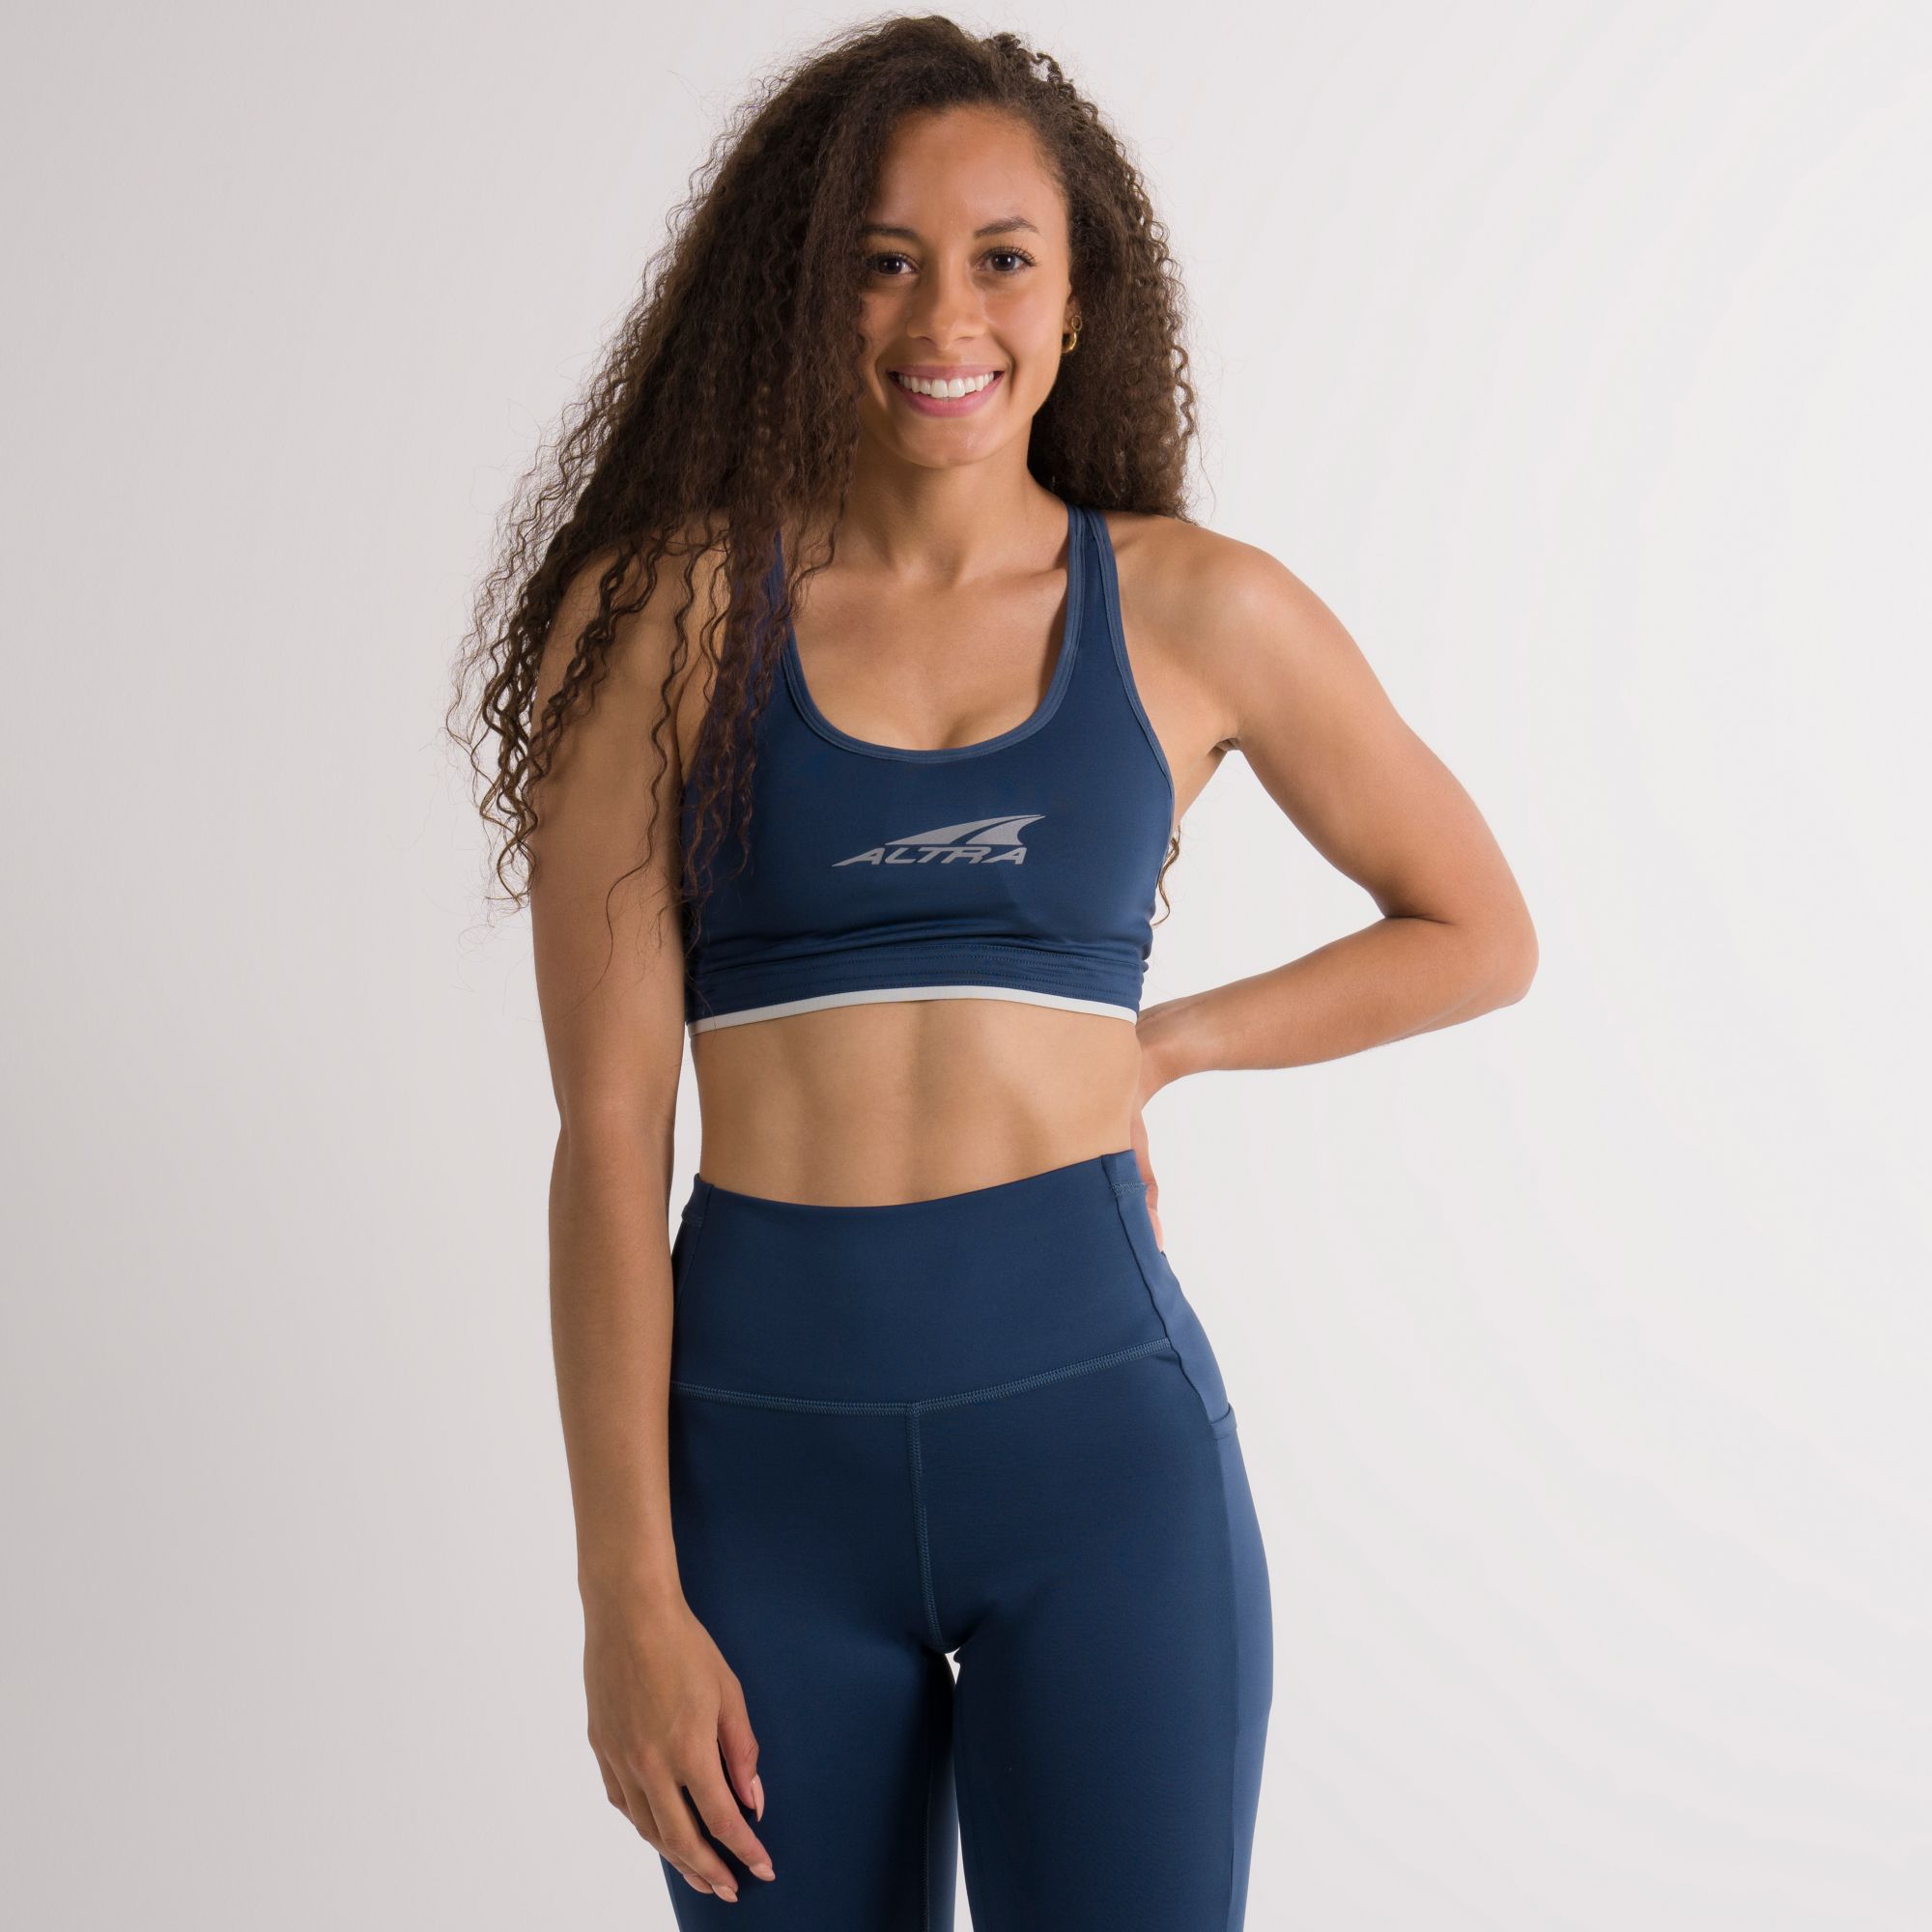 Top with integrated sports bra, CrossTraining Fitness